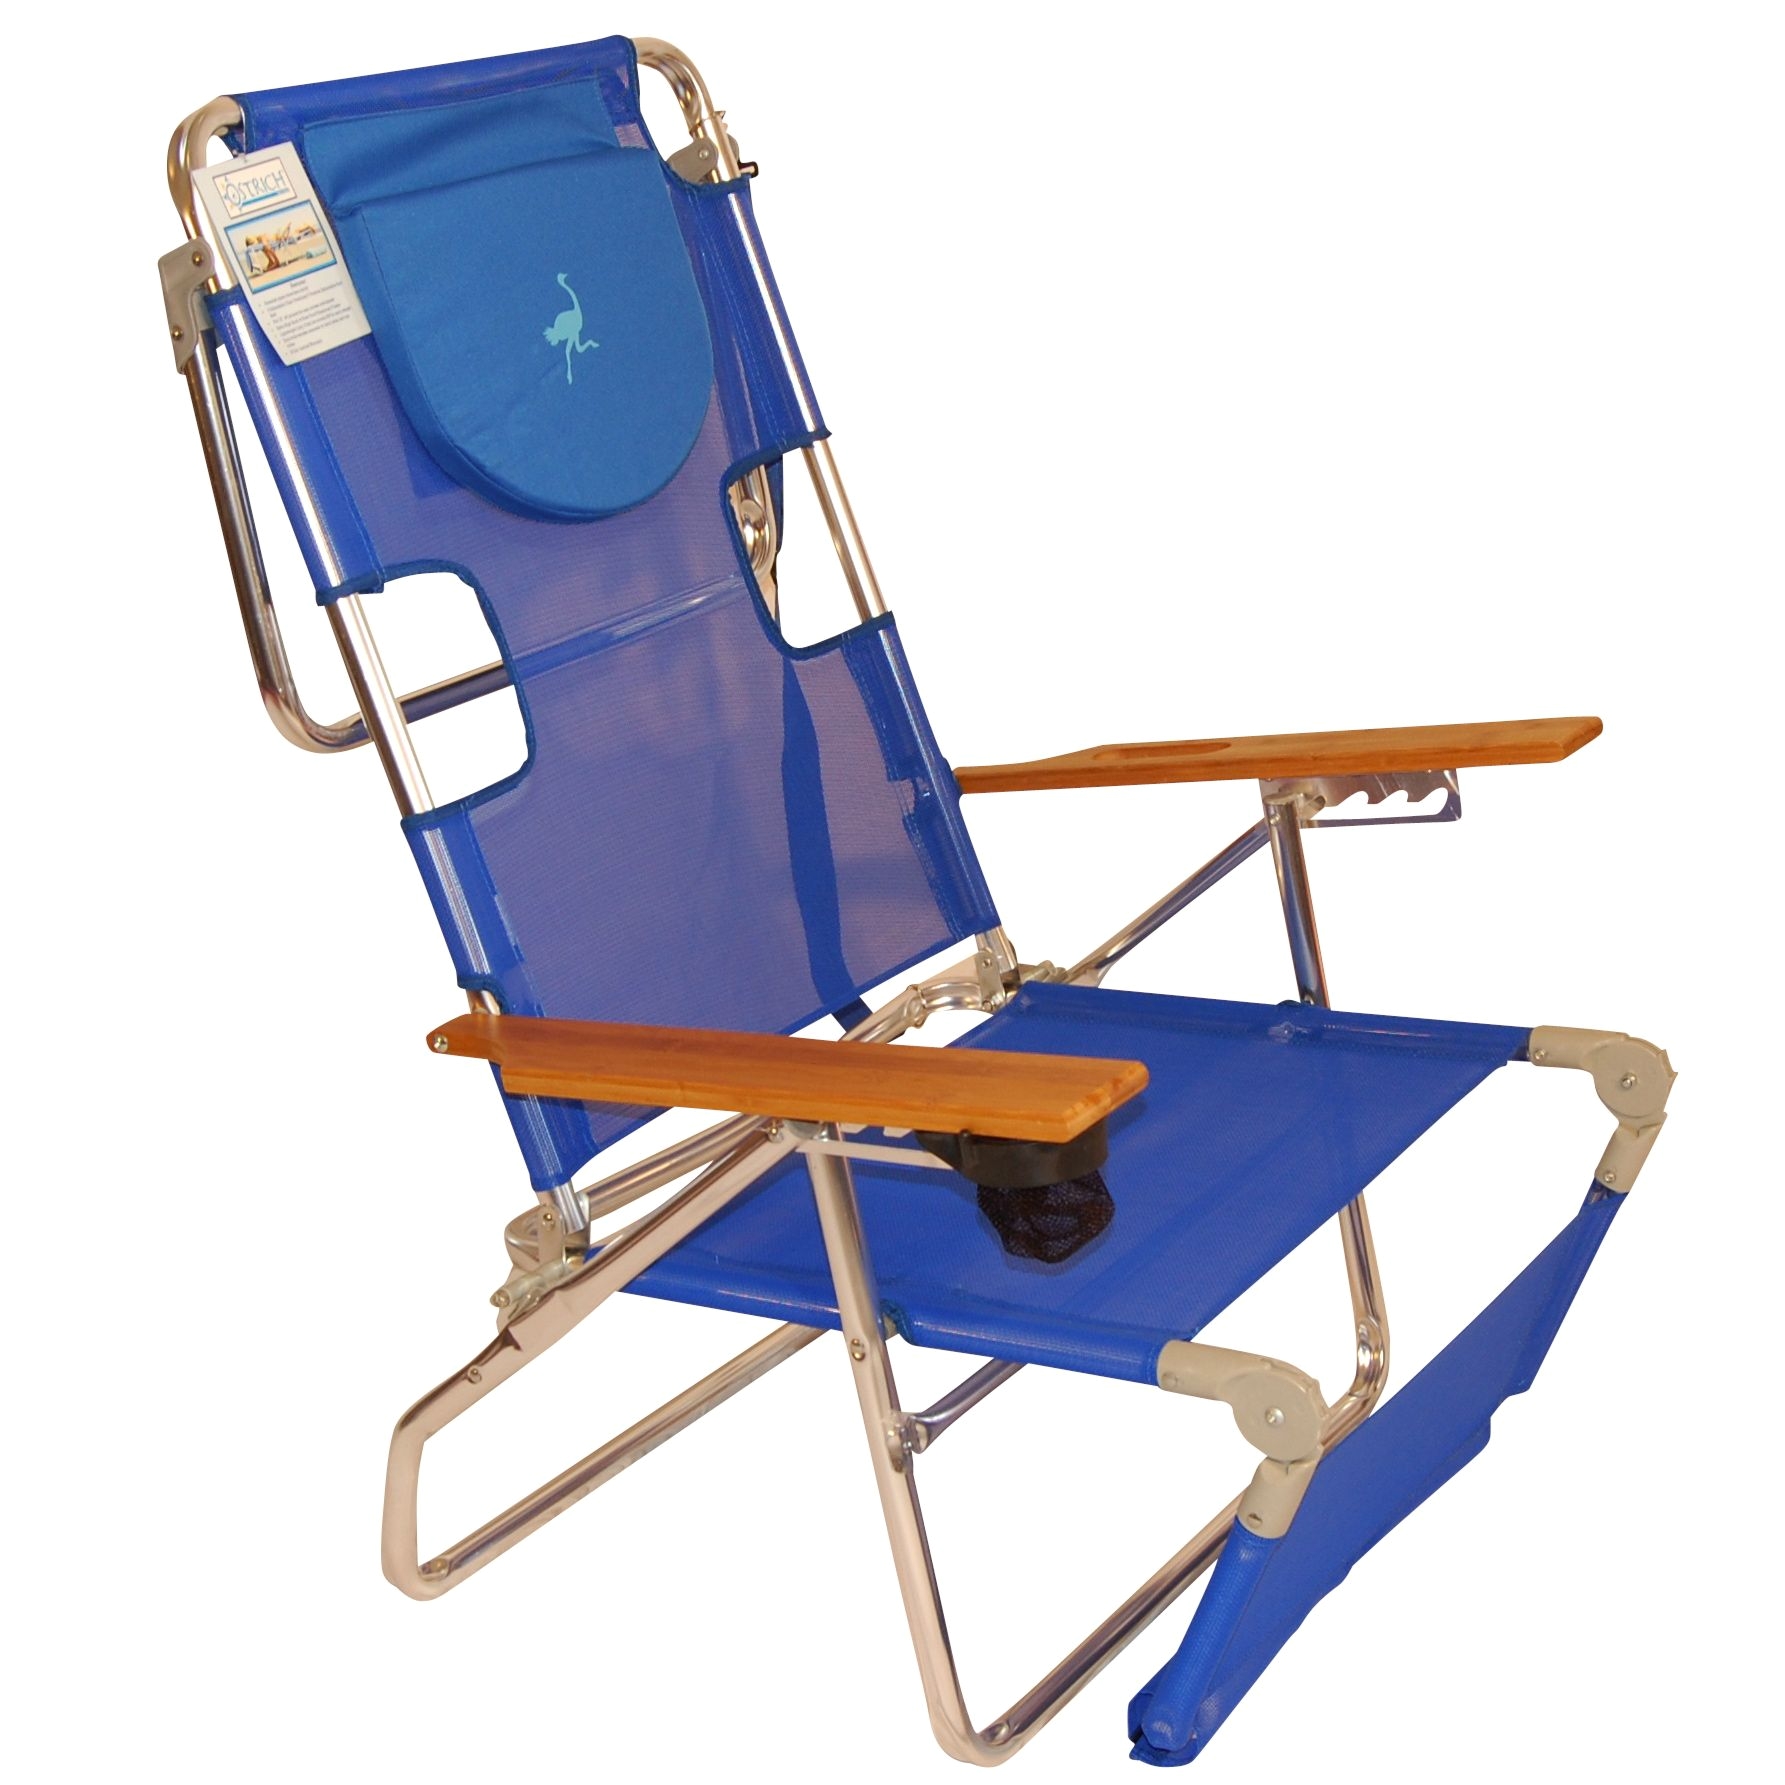 Heavy Duty Beach Chairs Uk Portable Garden Chairs Folding Camping Chair In Spain Camping